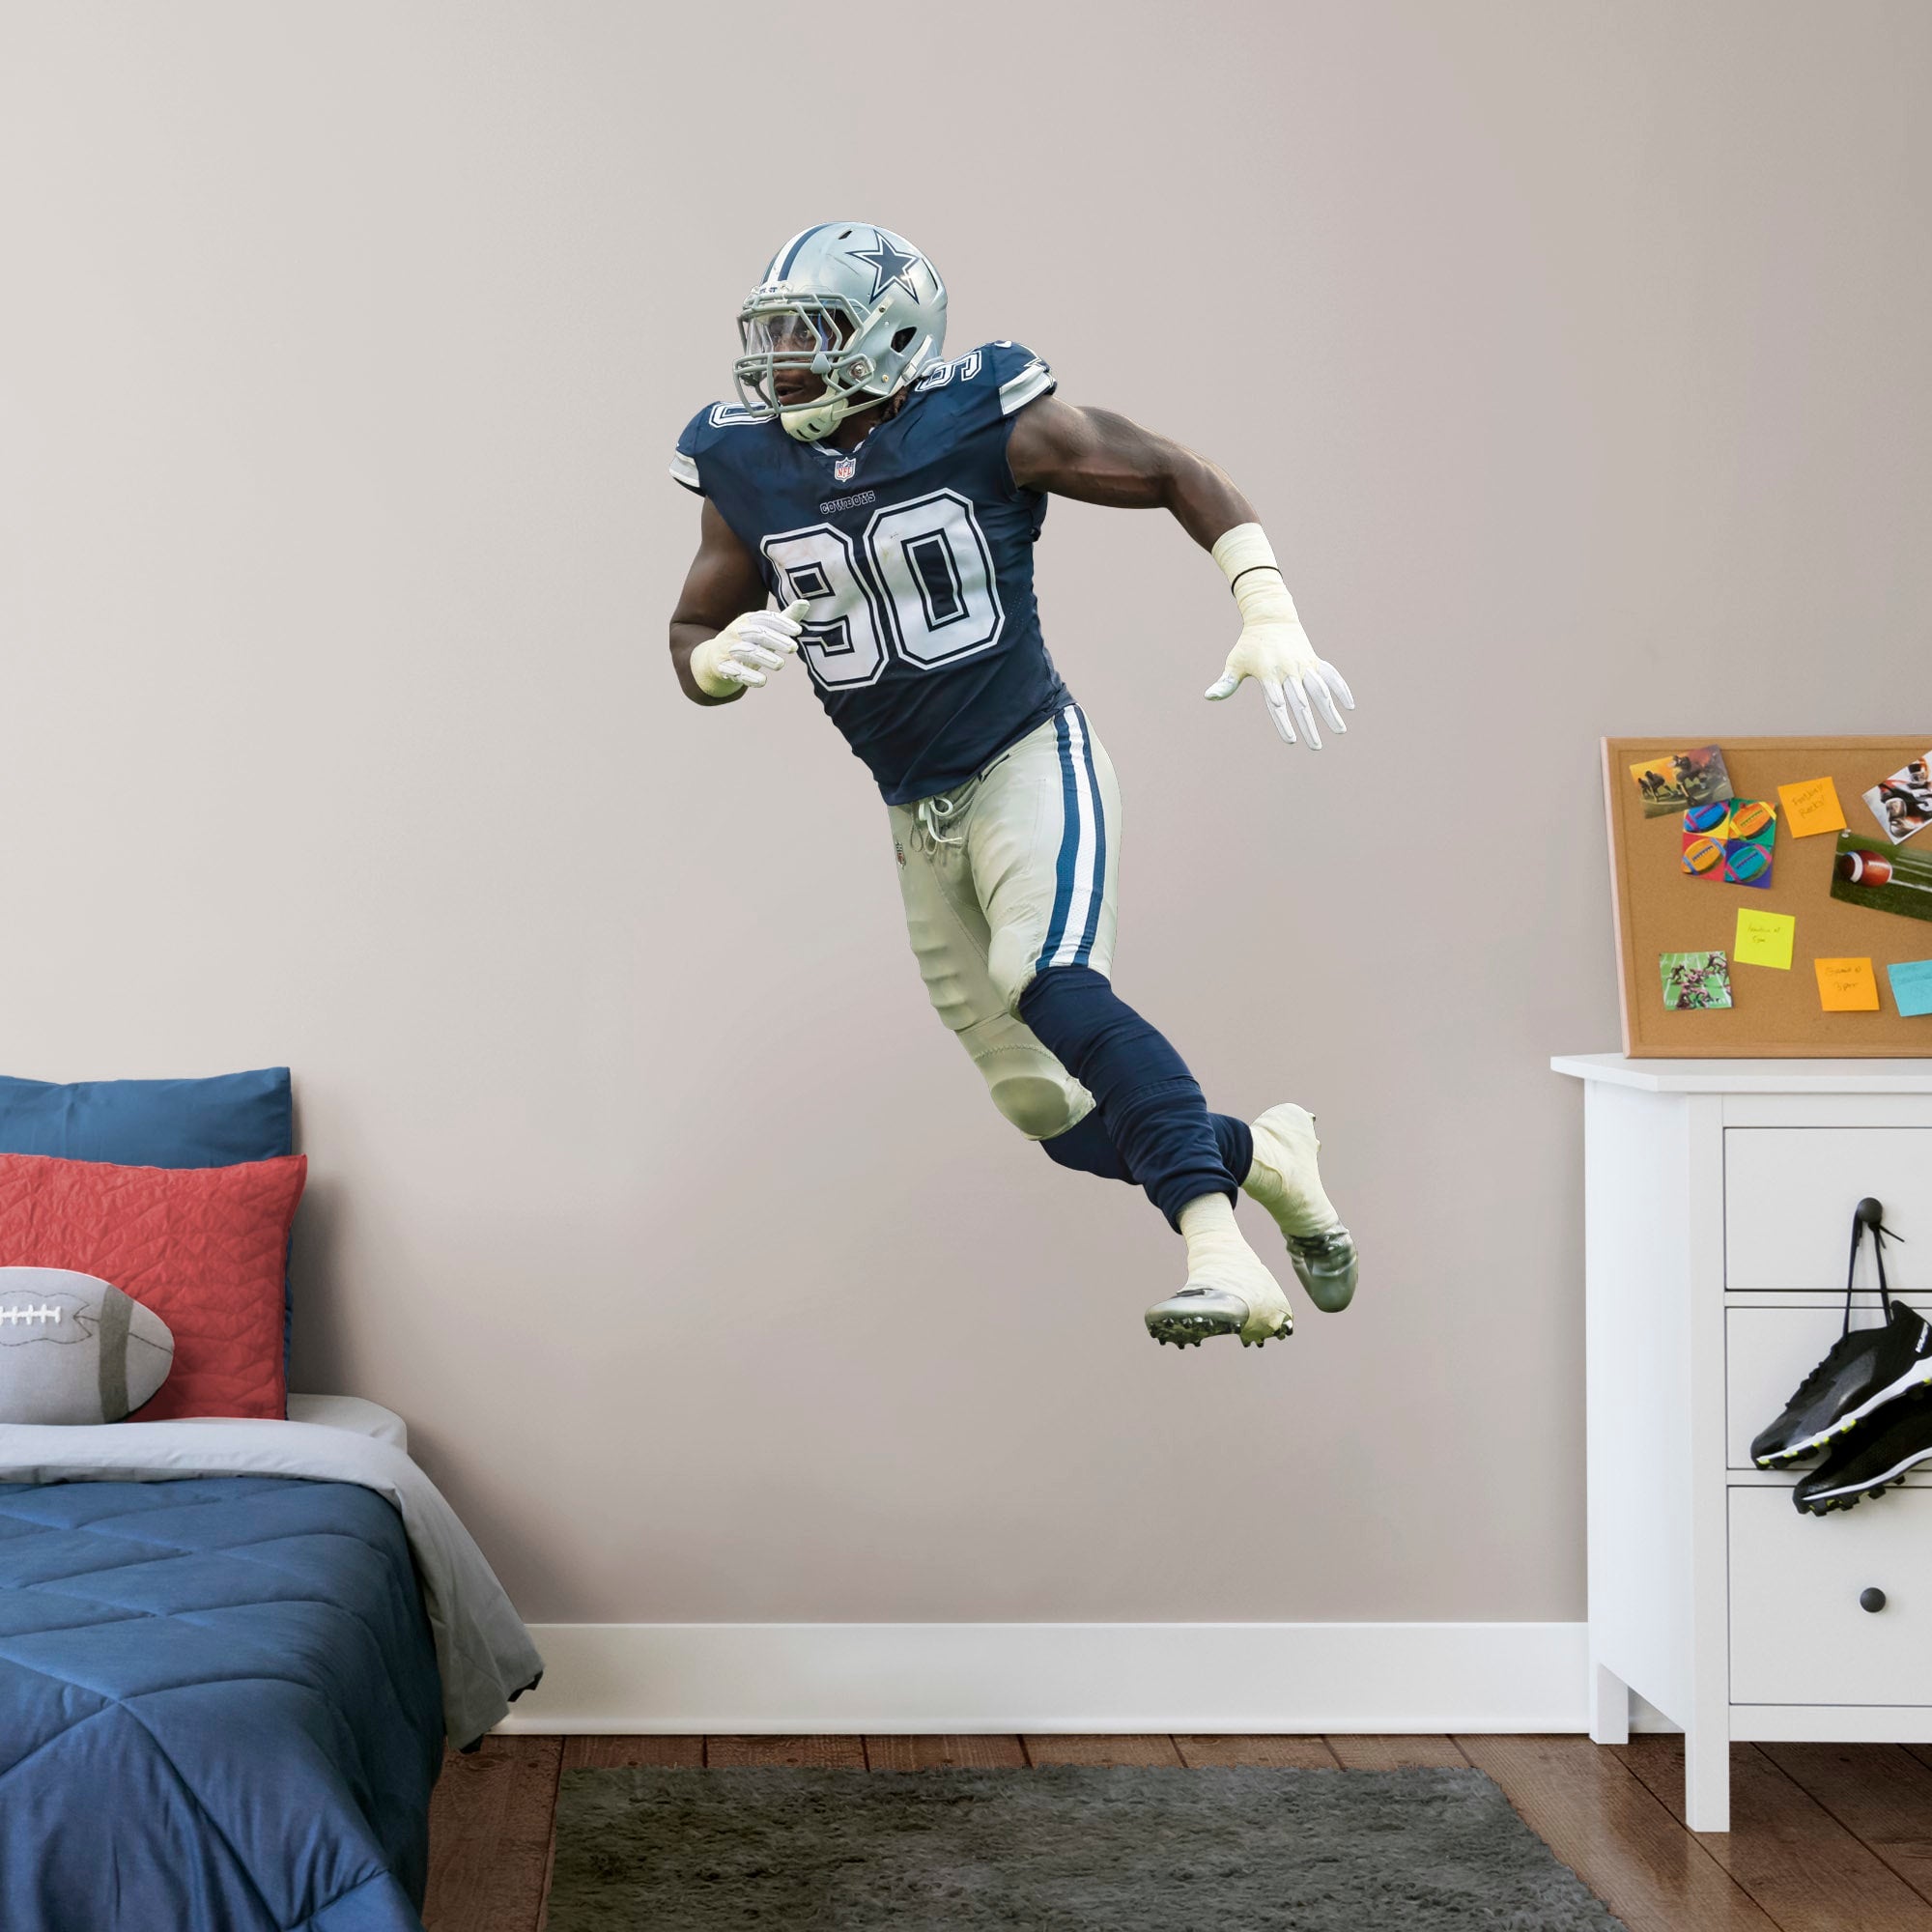 Demarcus Lawrence for Dallas Cowboys - Officially Licensed NFL Removable Wall Decal Giant Athlete + 2 Decals (31"W x 51"H) by Fa